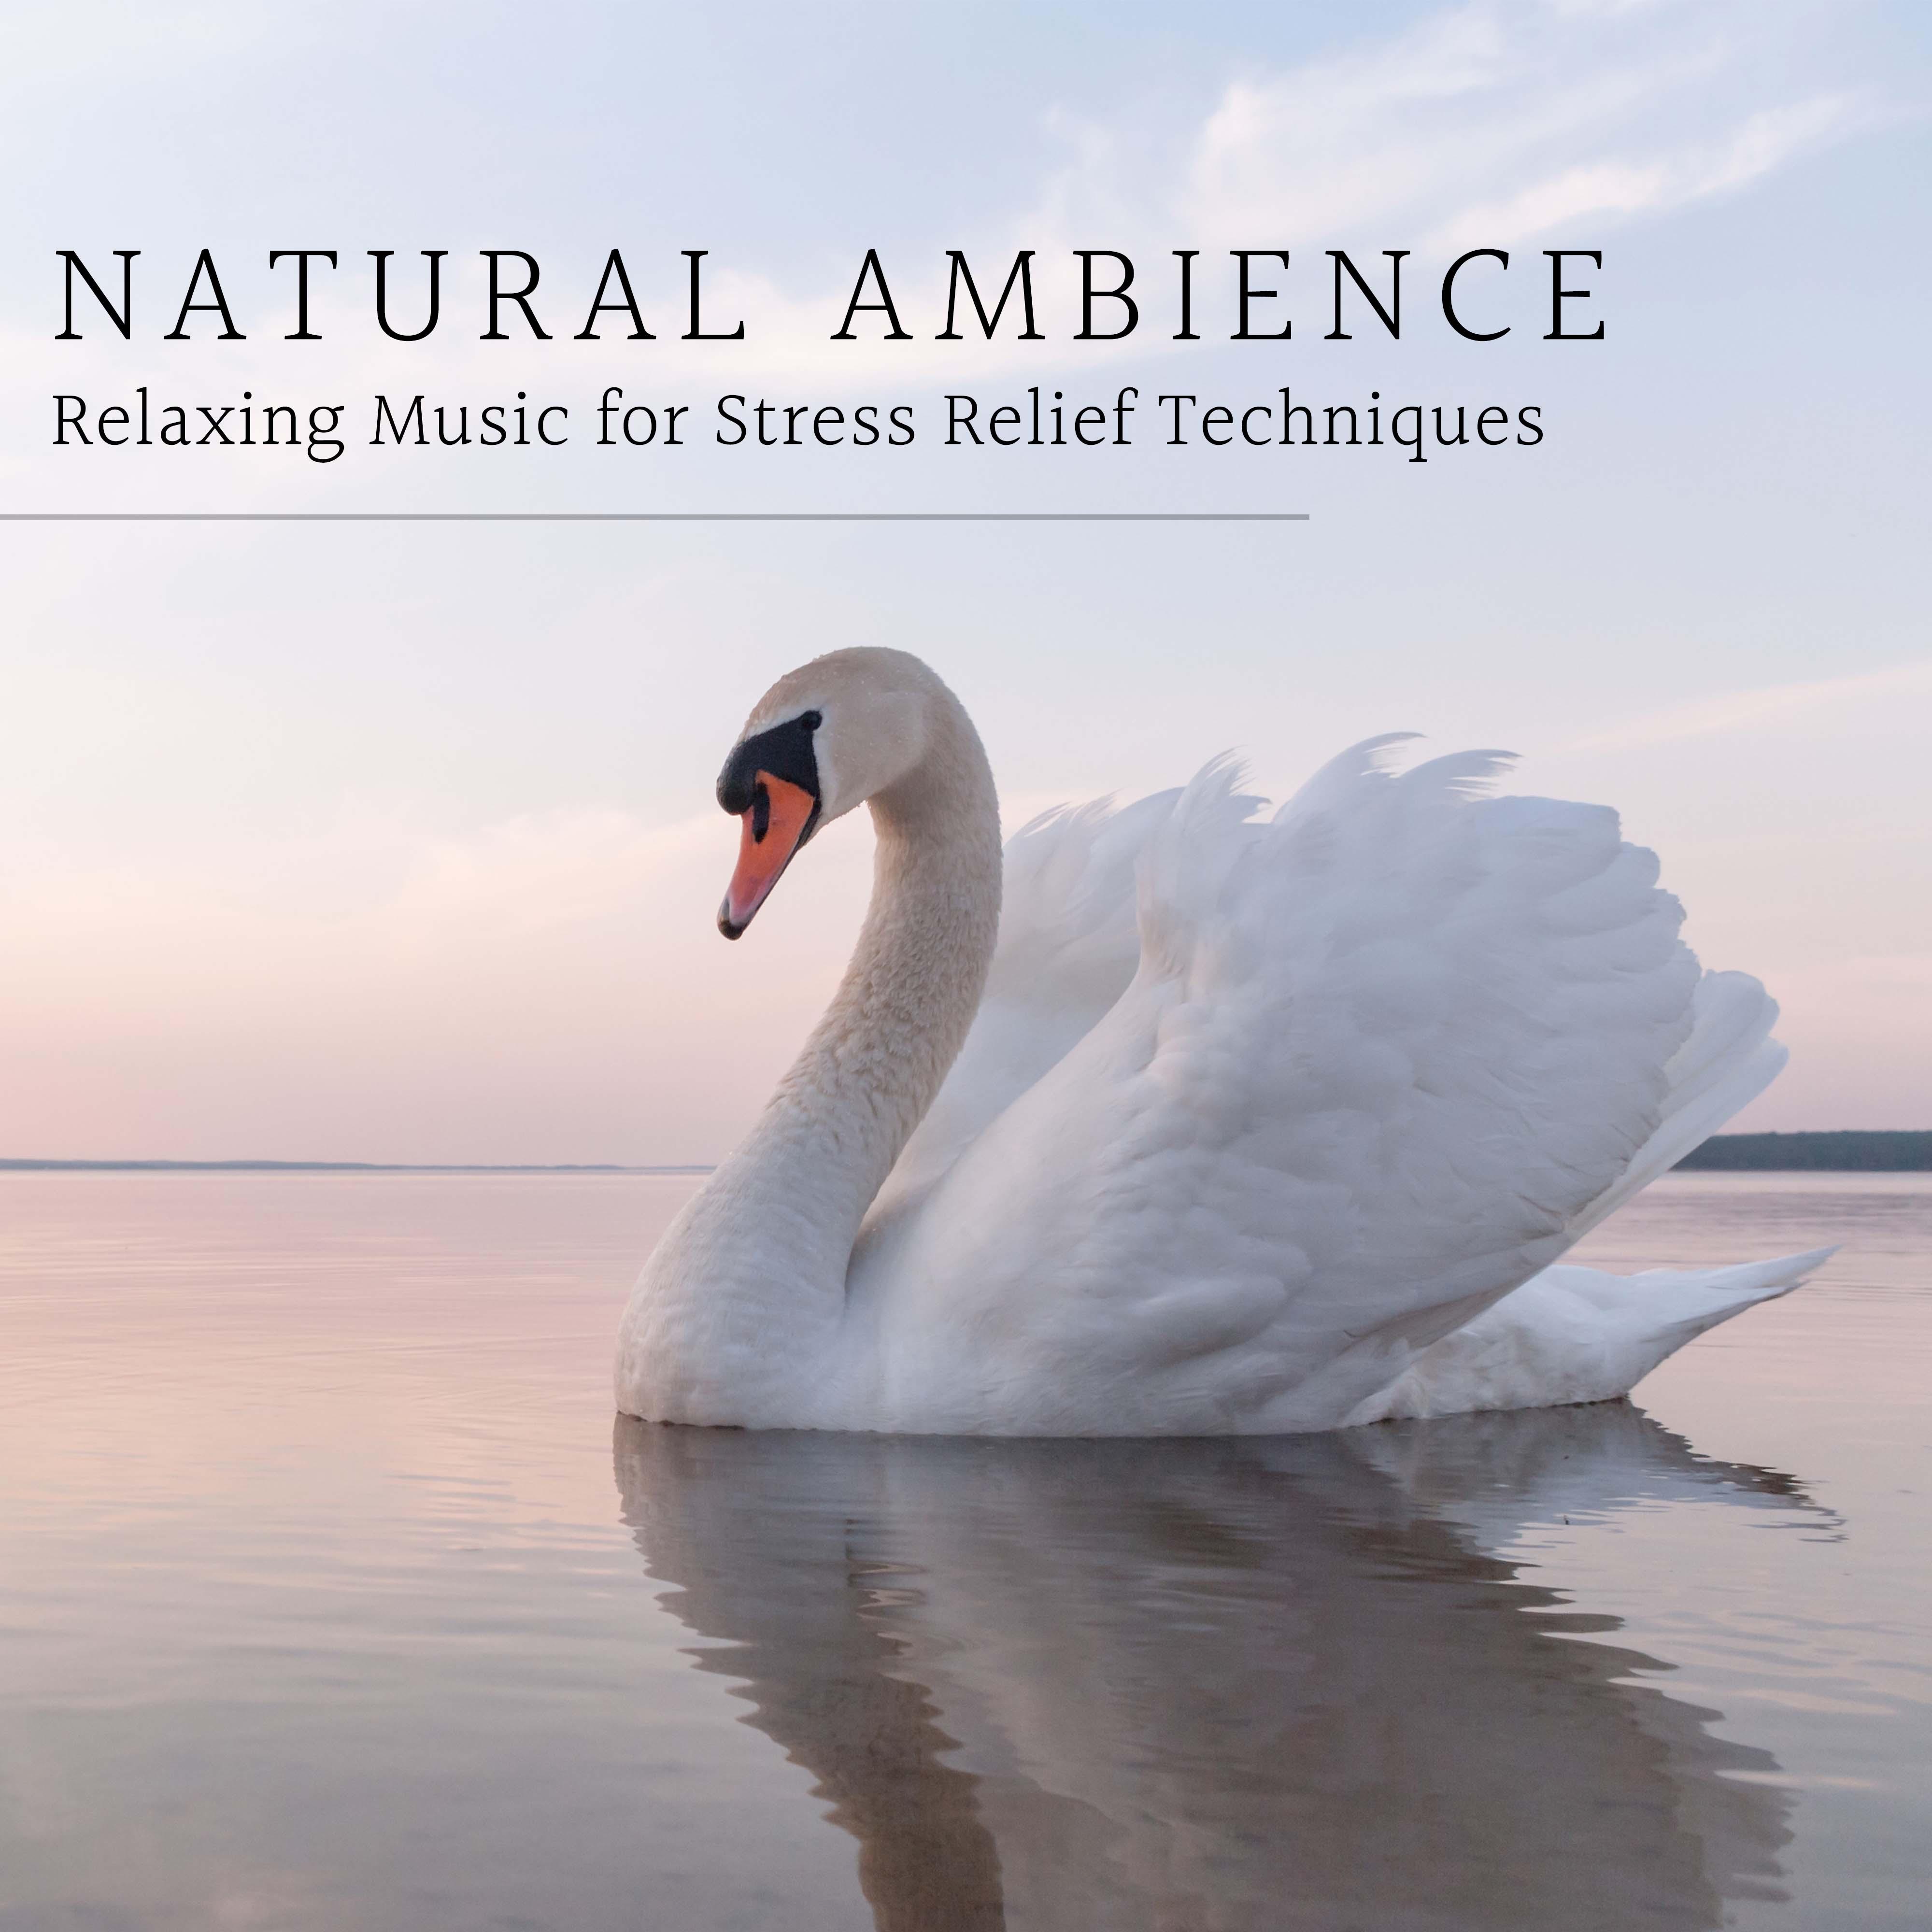 Natural Ambience - Relaxing Music for Stress Relief Techniques